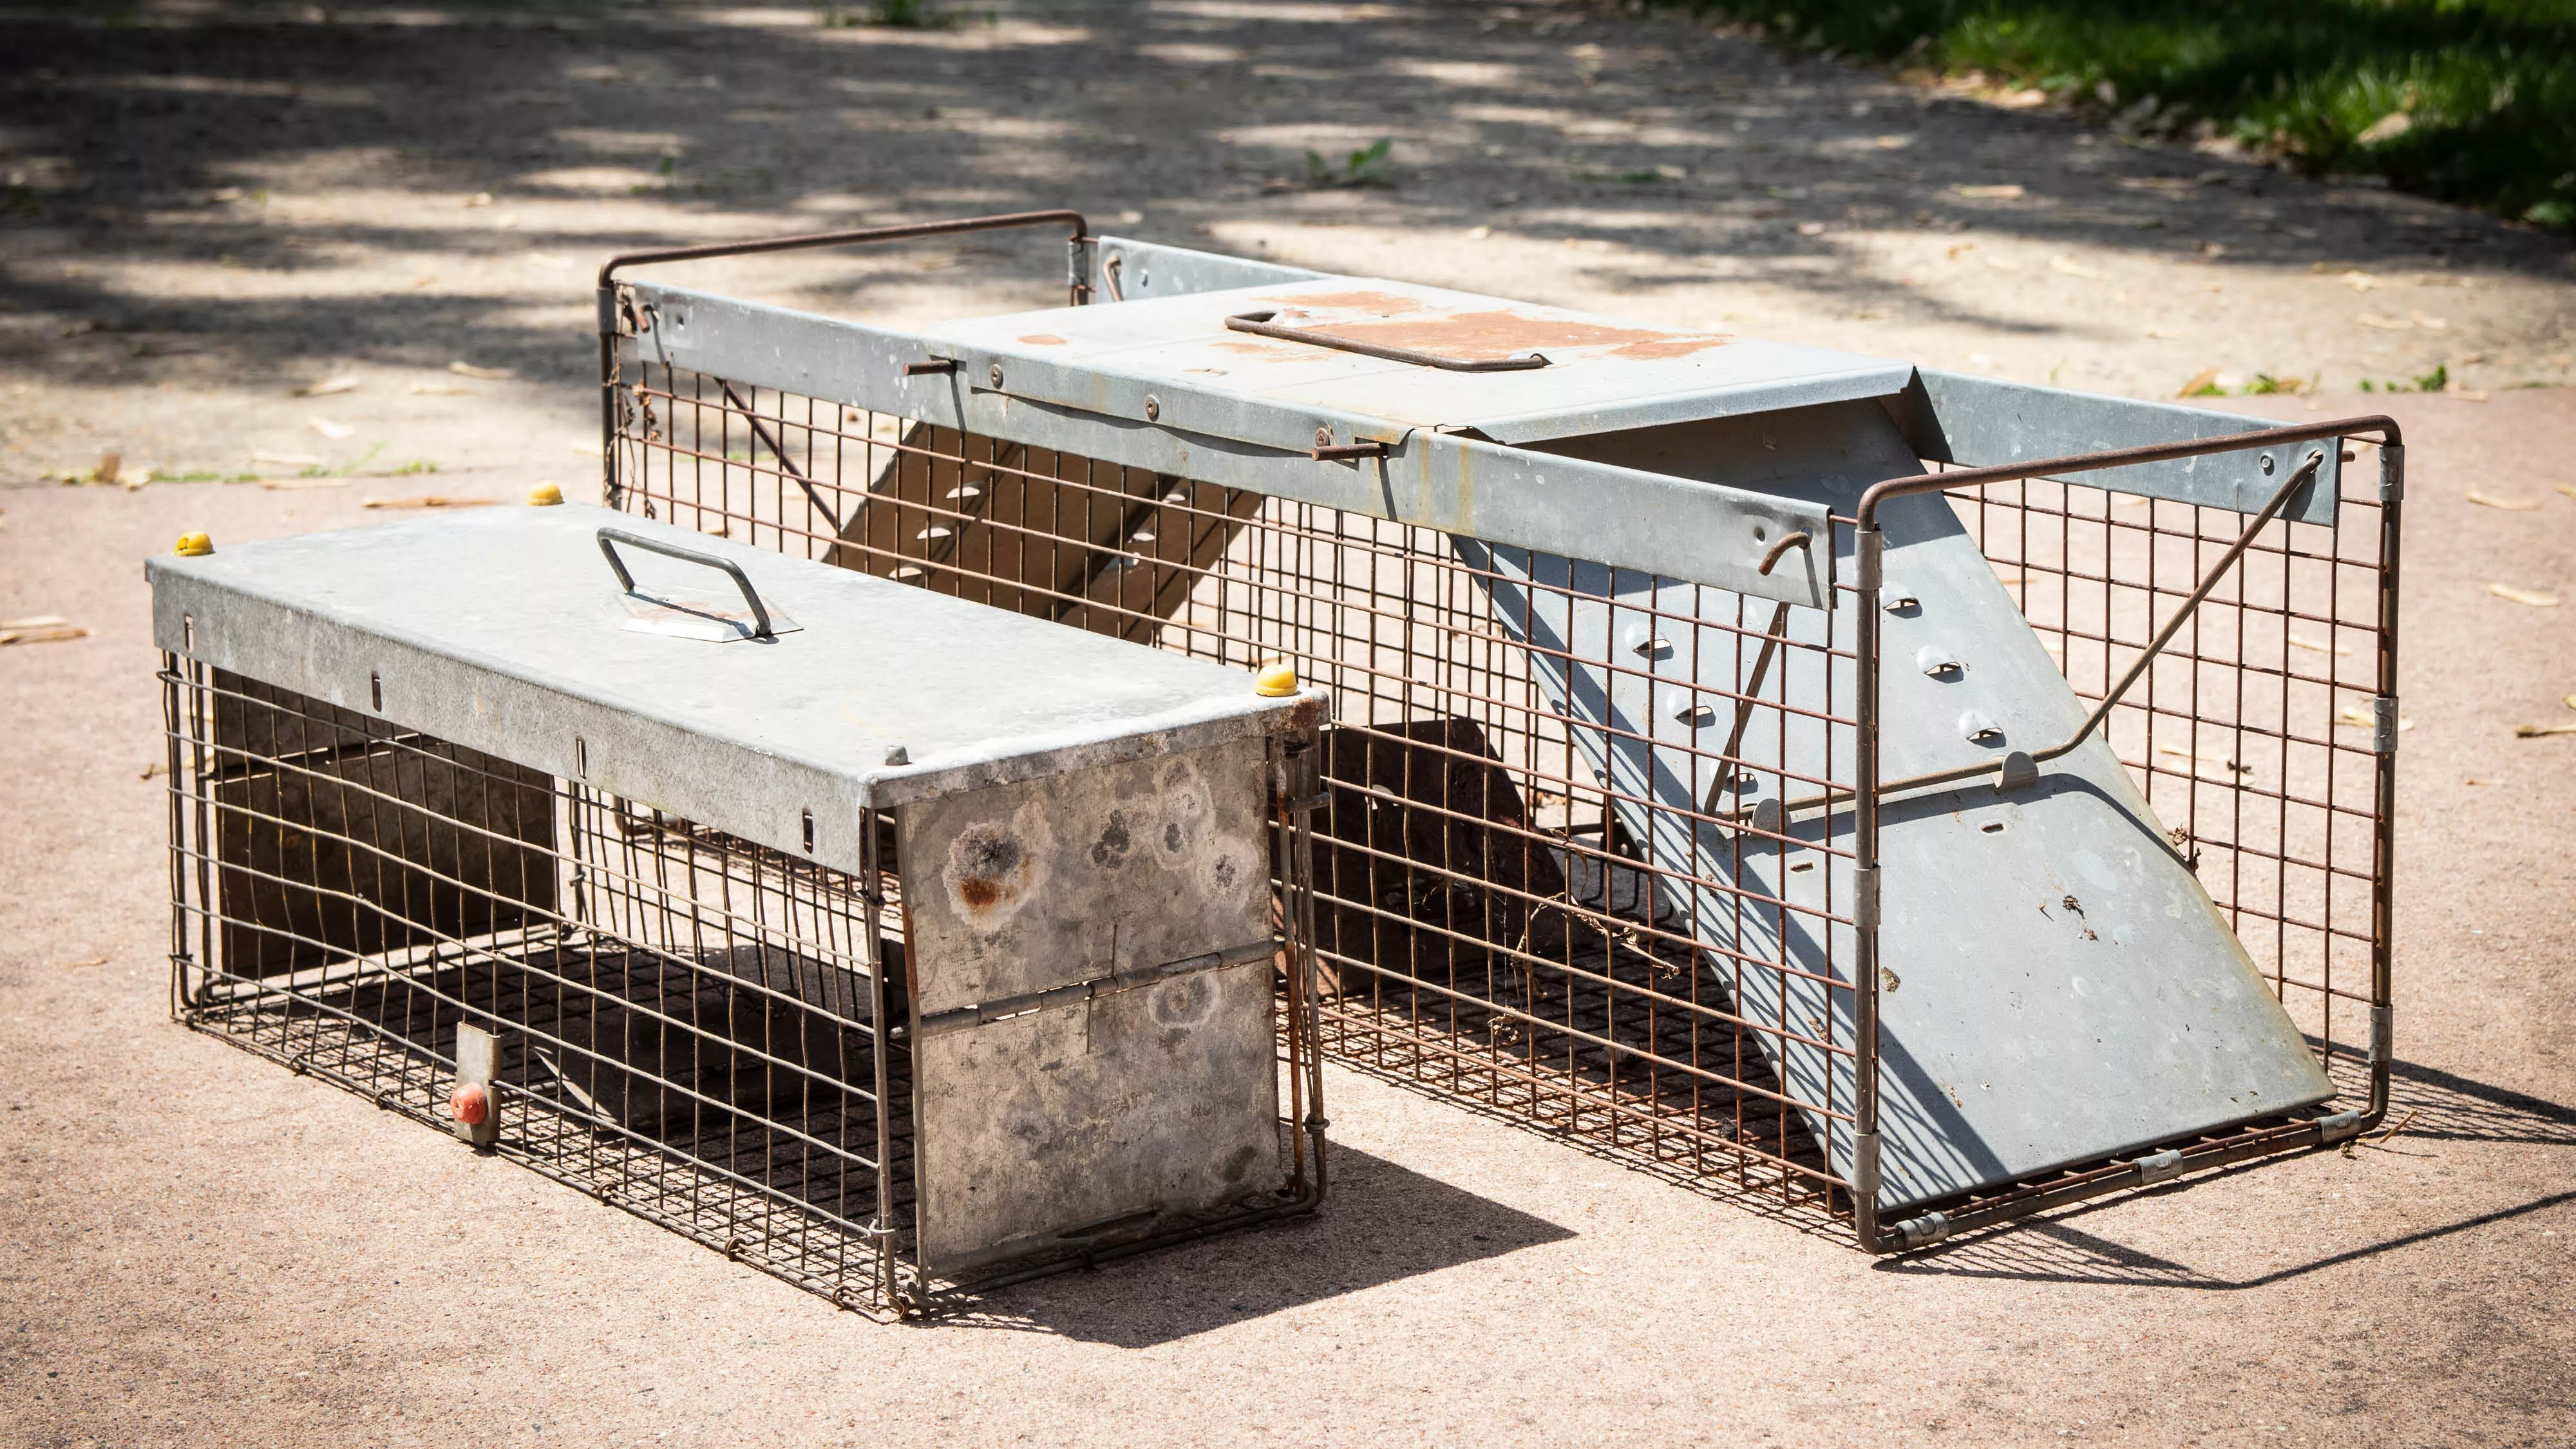 and image of animal cages used by wildlife removal companies